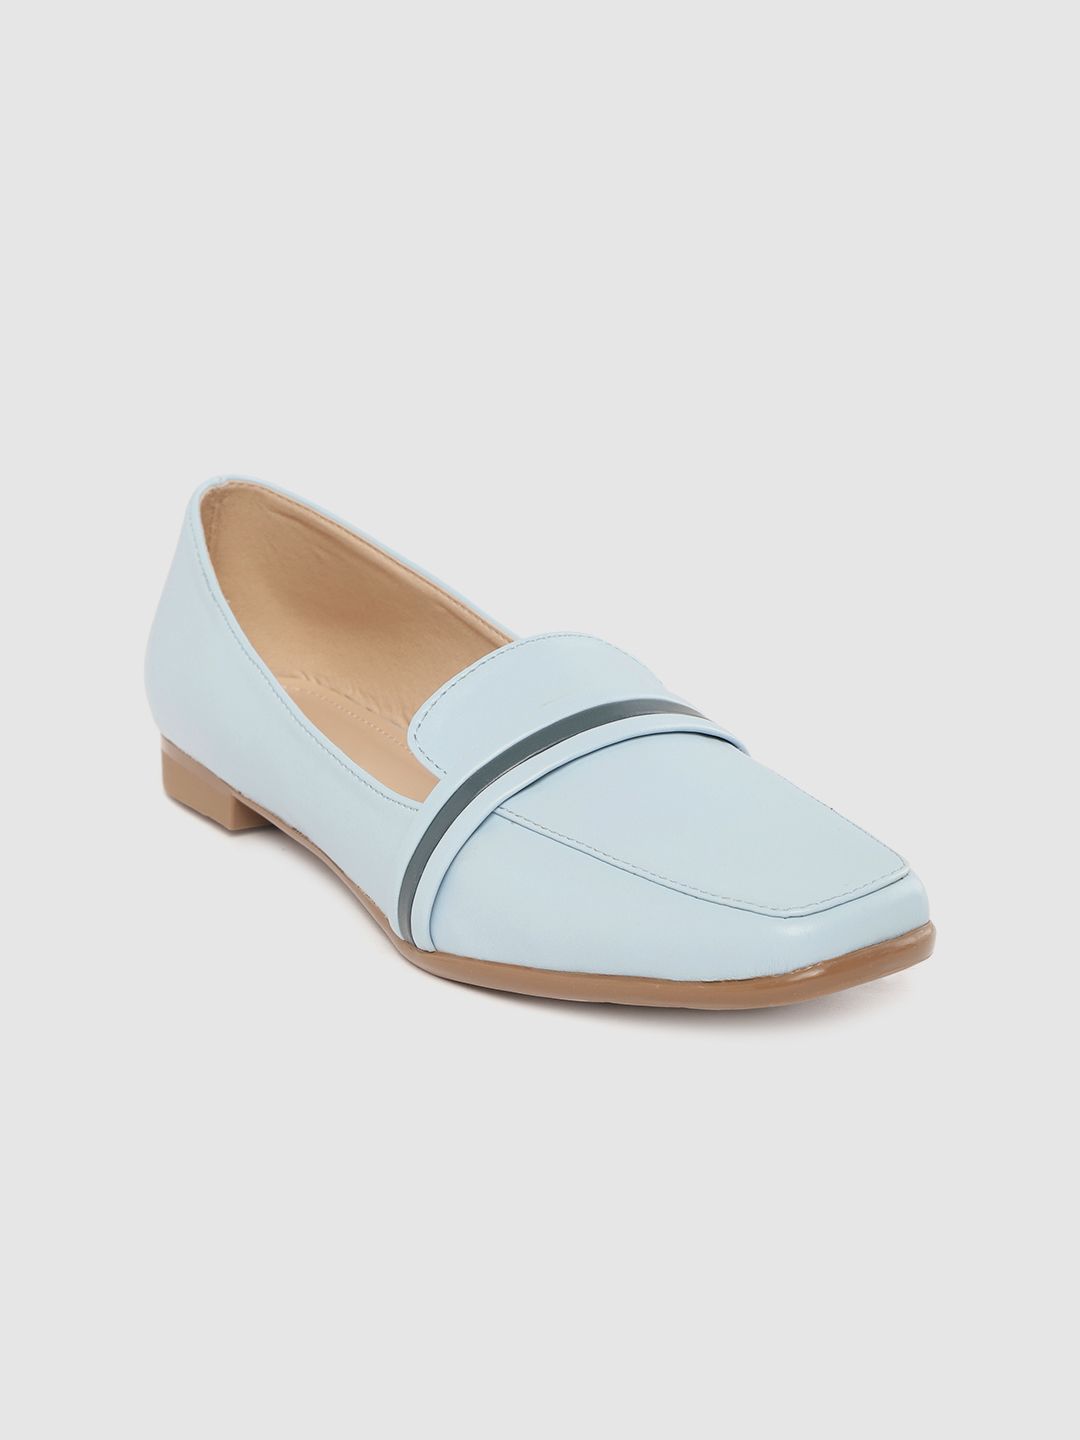 Mast & Harbour Women Blue Solid Slip-Ons Price in India